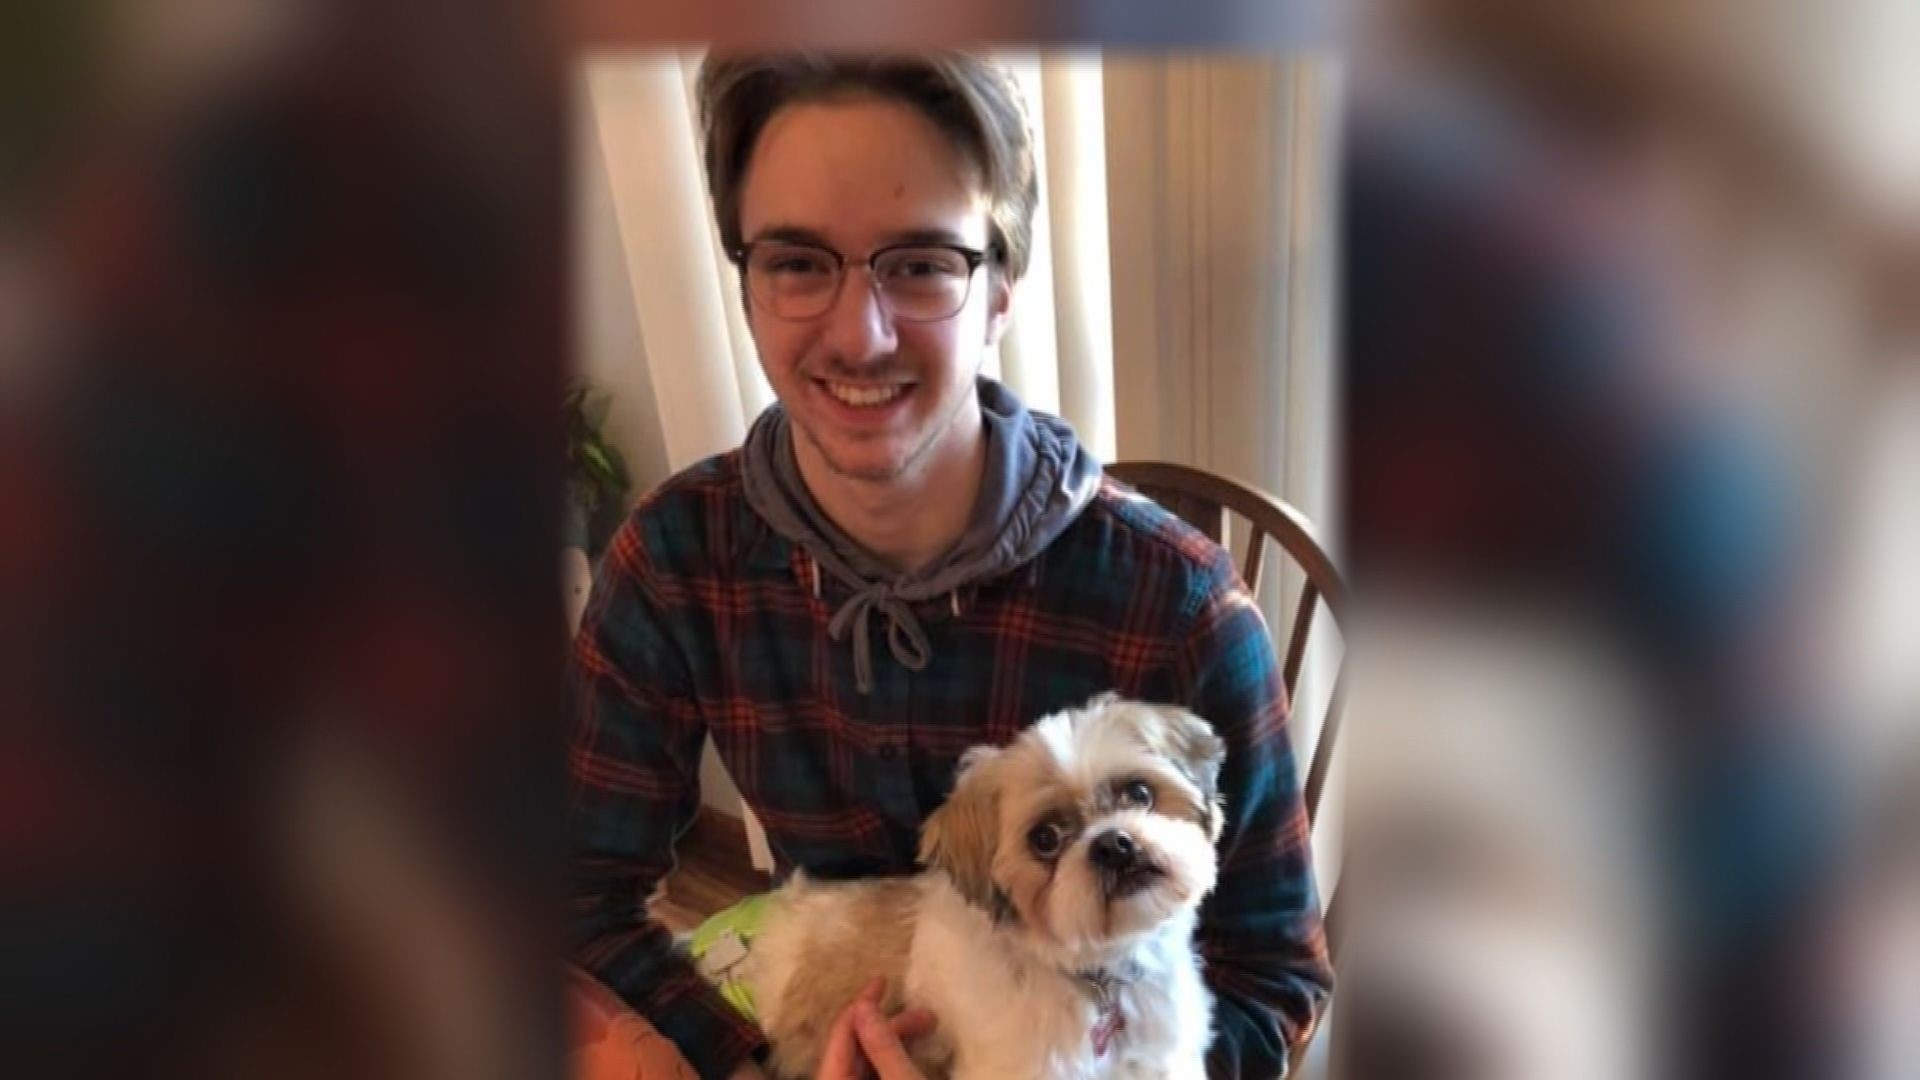 UMD student Jacob Lavoie walked out of Grandma's Sports Garden early Sunday, walked towards downtown and hasn't been seen since.